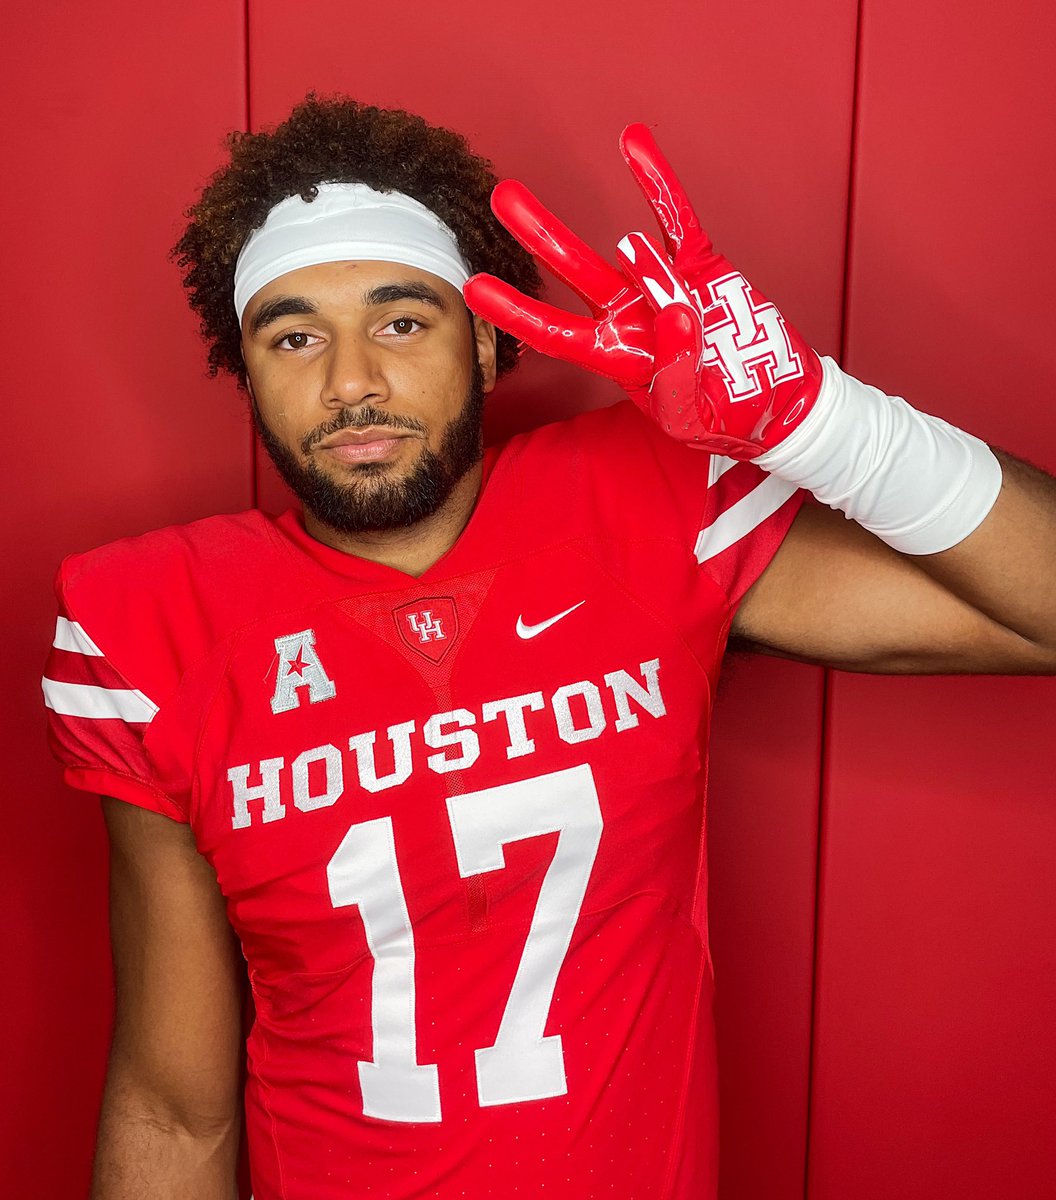 H-Town, my second home like I’m James Harden #GoCoogs